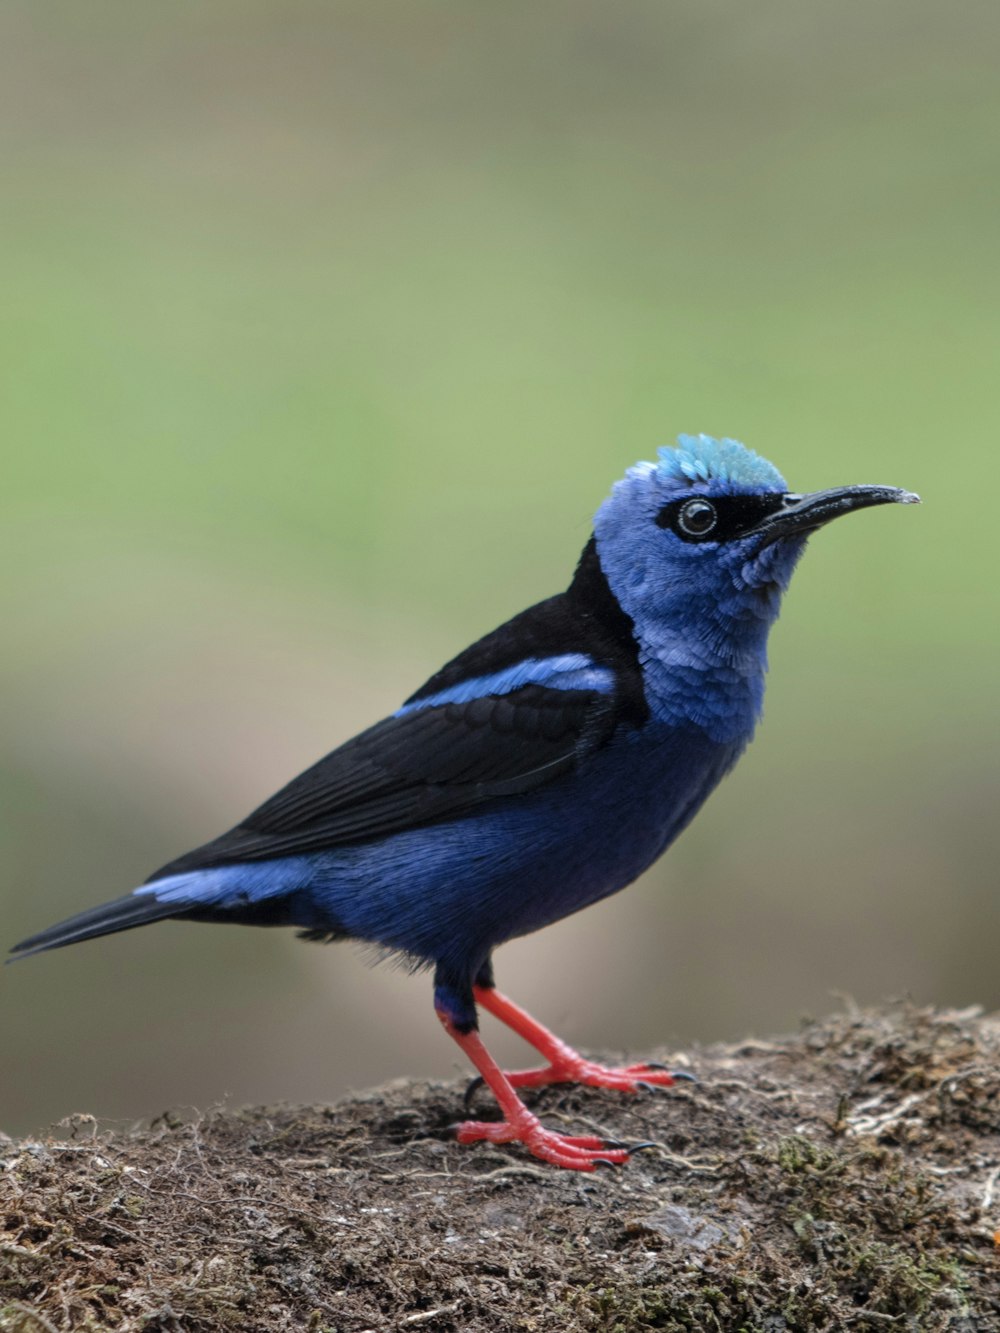 a blue and black bird standing on a rock